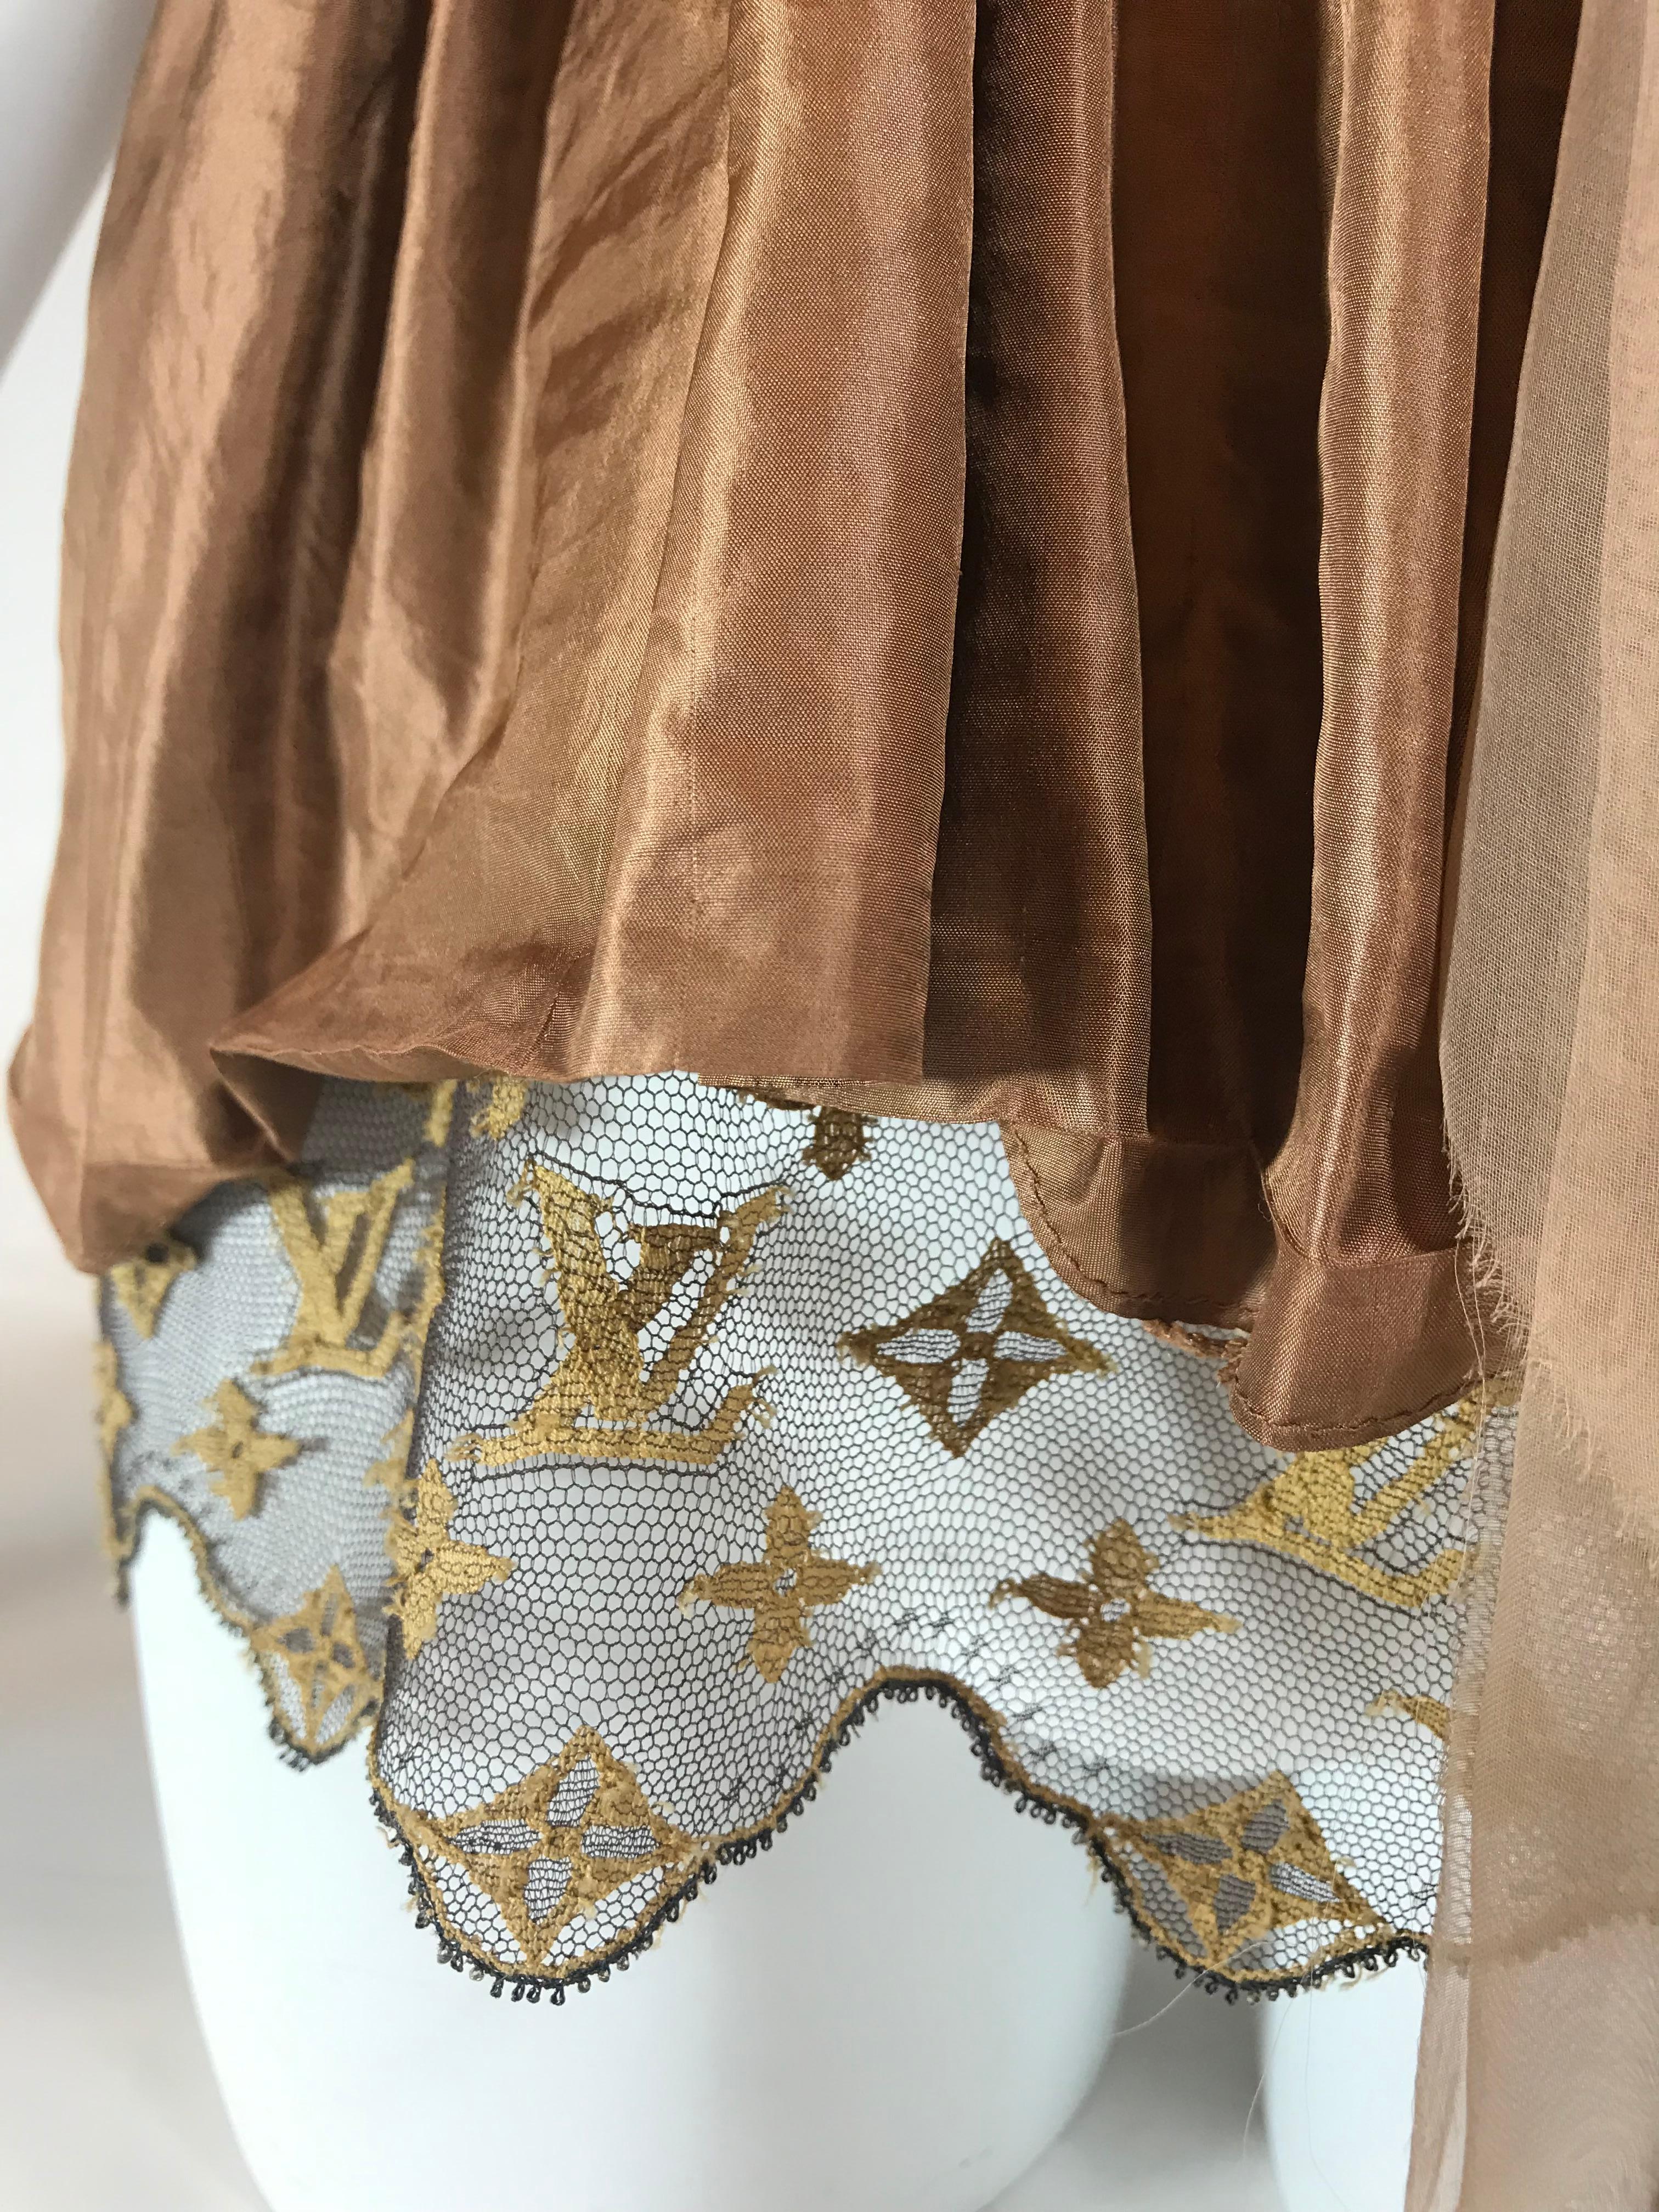 Louis Vuitton Monogram Lace-Trimmed Top In Good Condition For Sale In Roslyn, NY